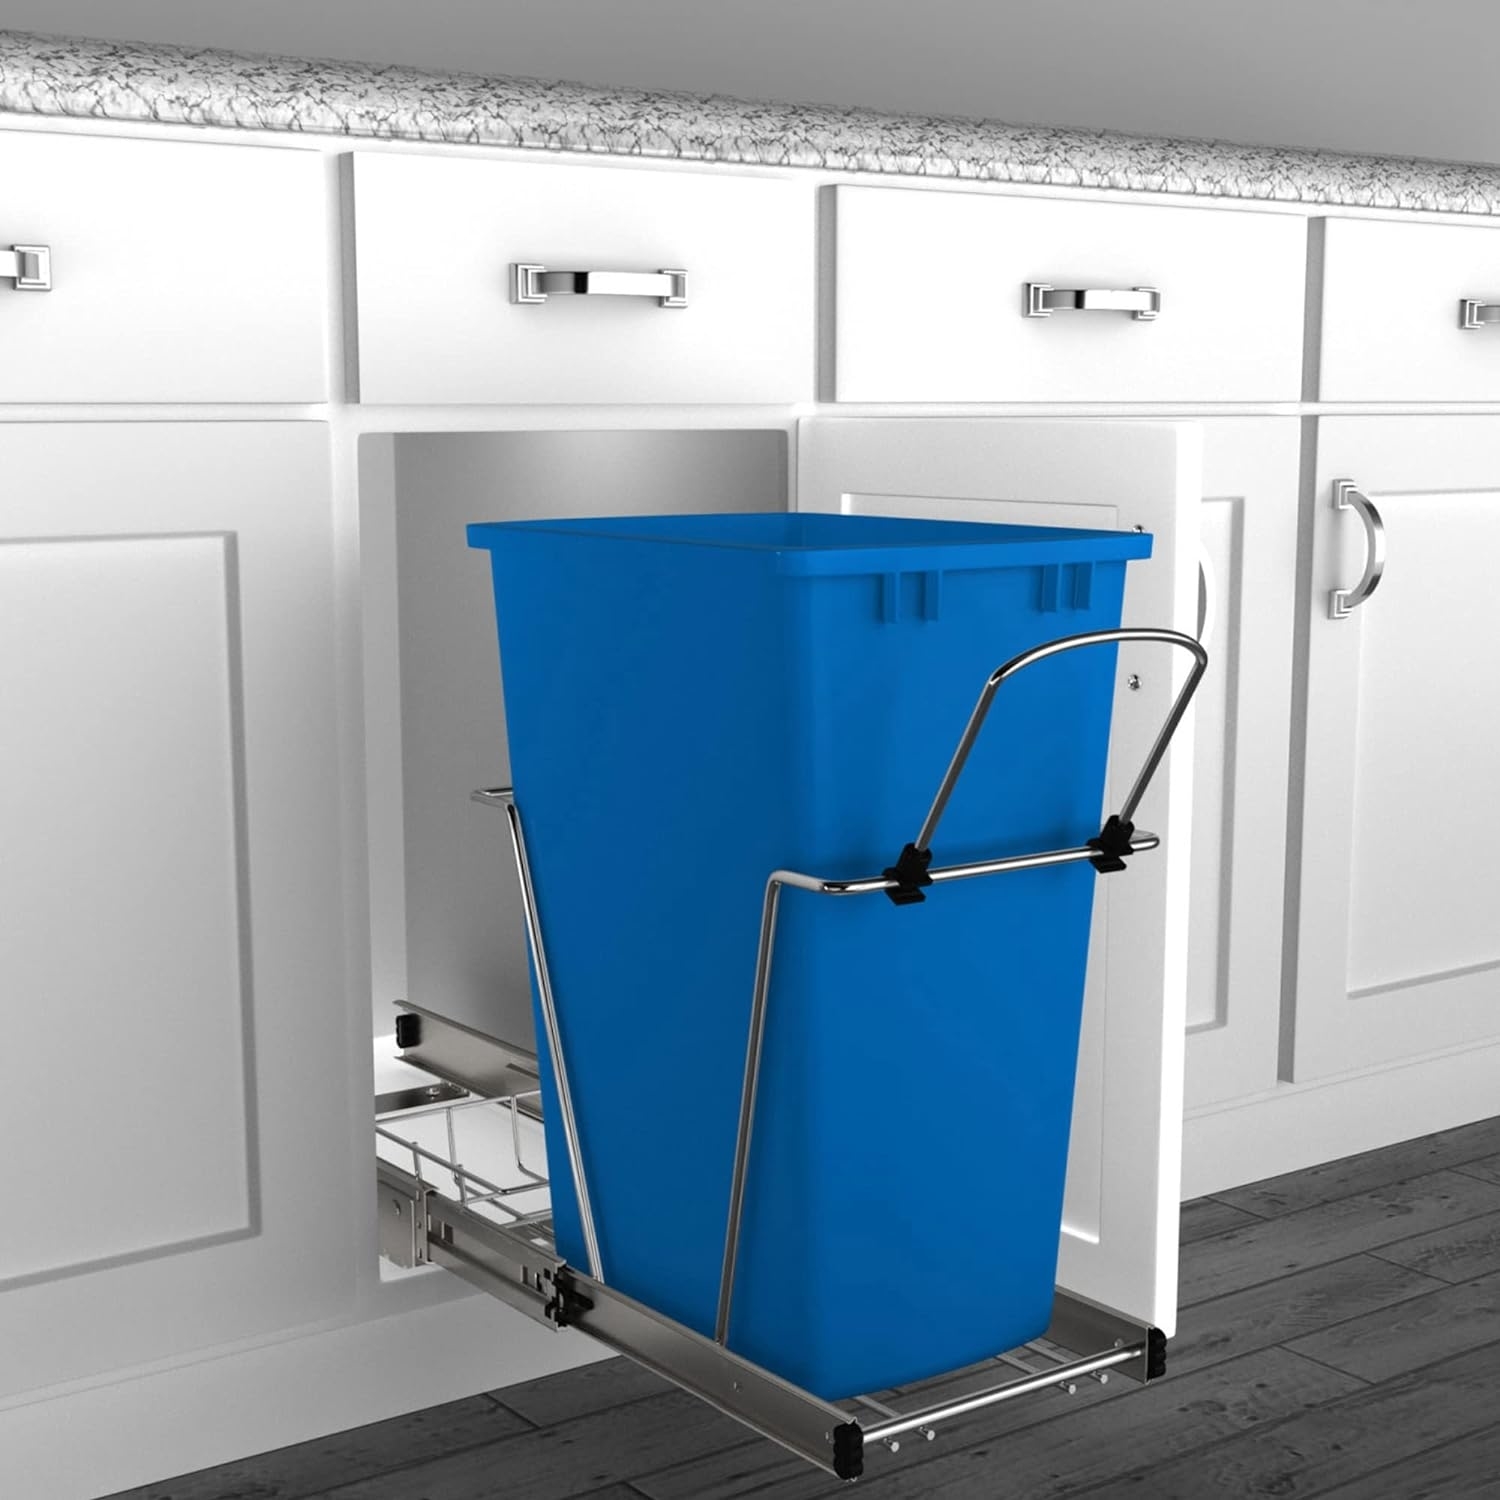 blue trash can abalanced on wire shelf that slides completely out of cabinet